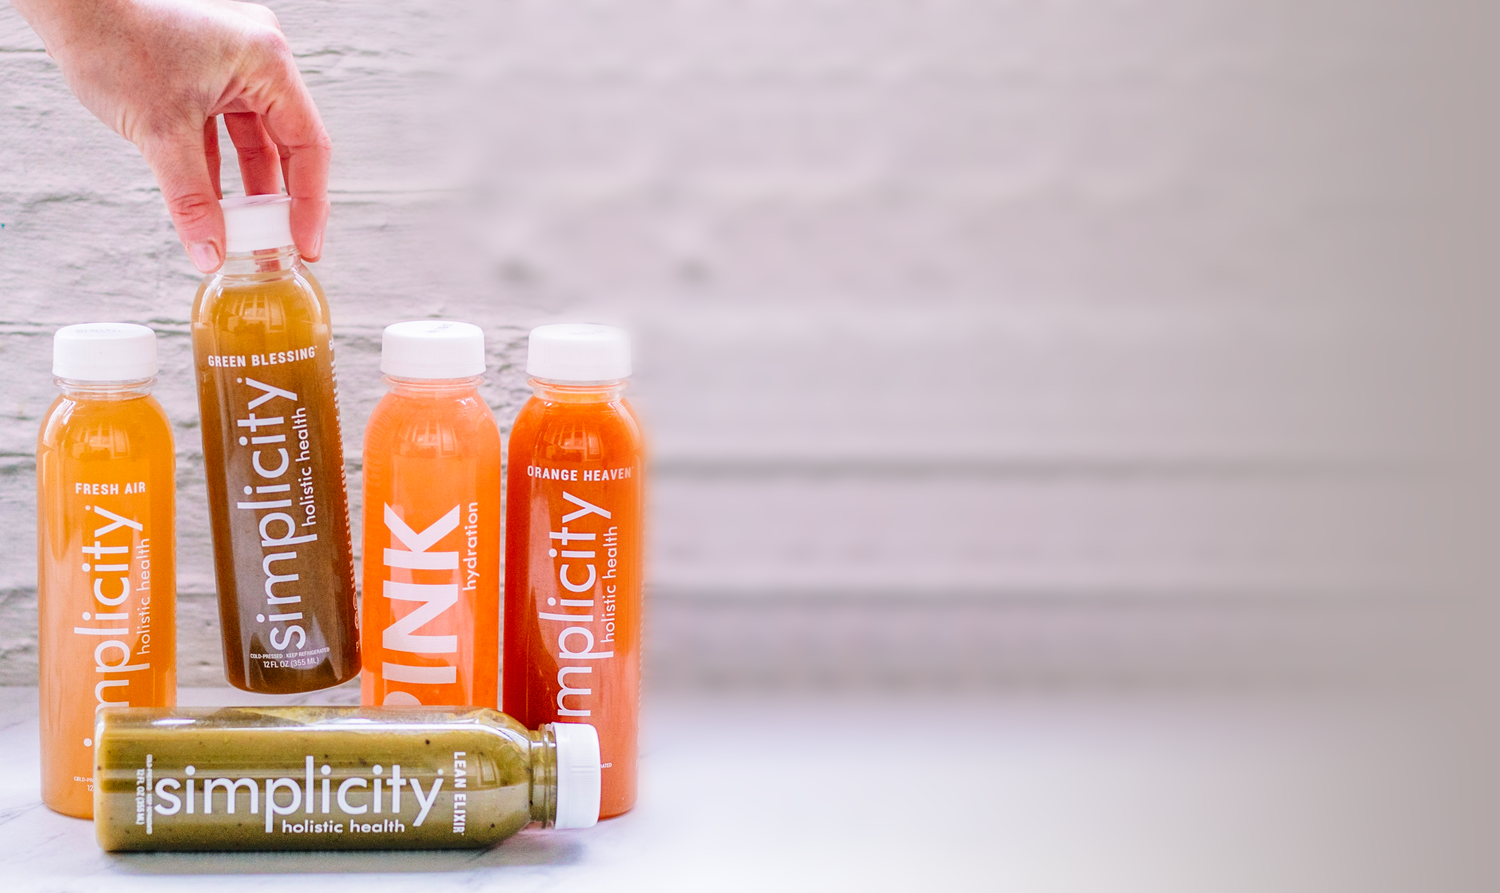 Use live juices for a holistic juice cleanse from Simplicity Juice.